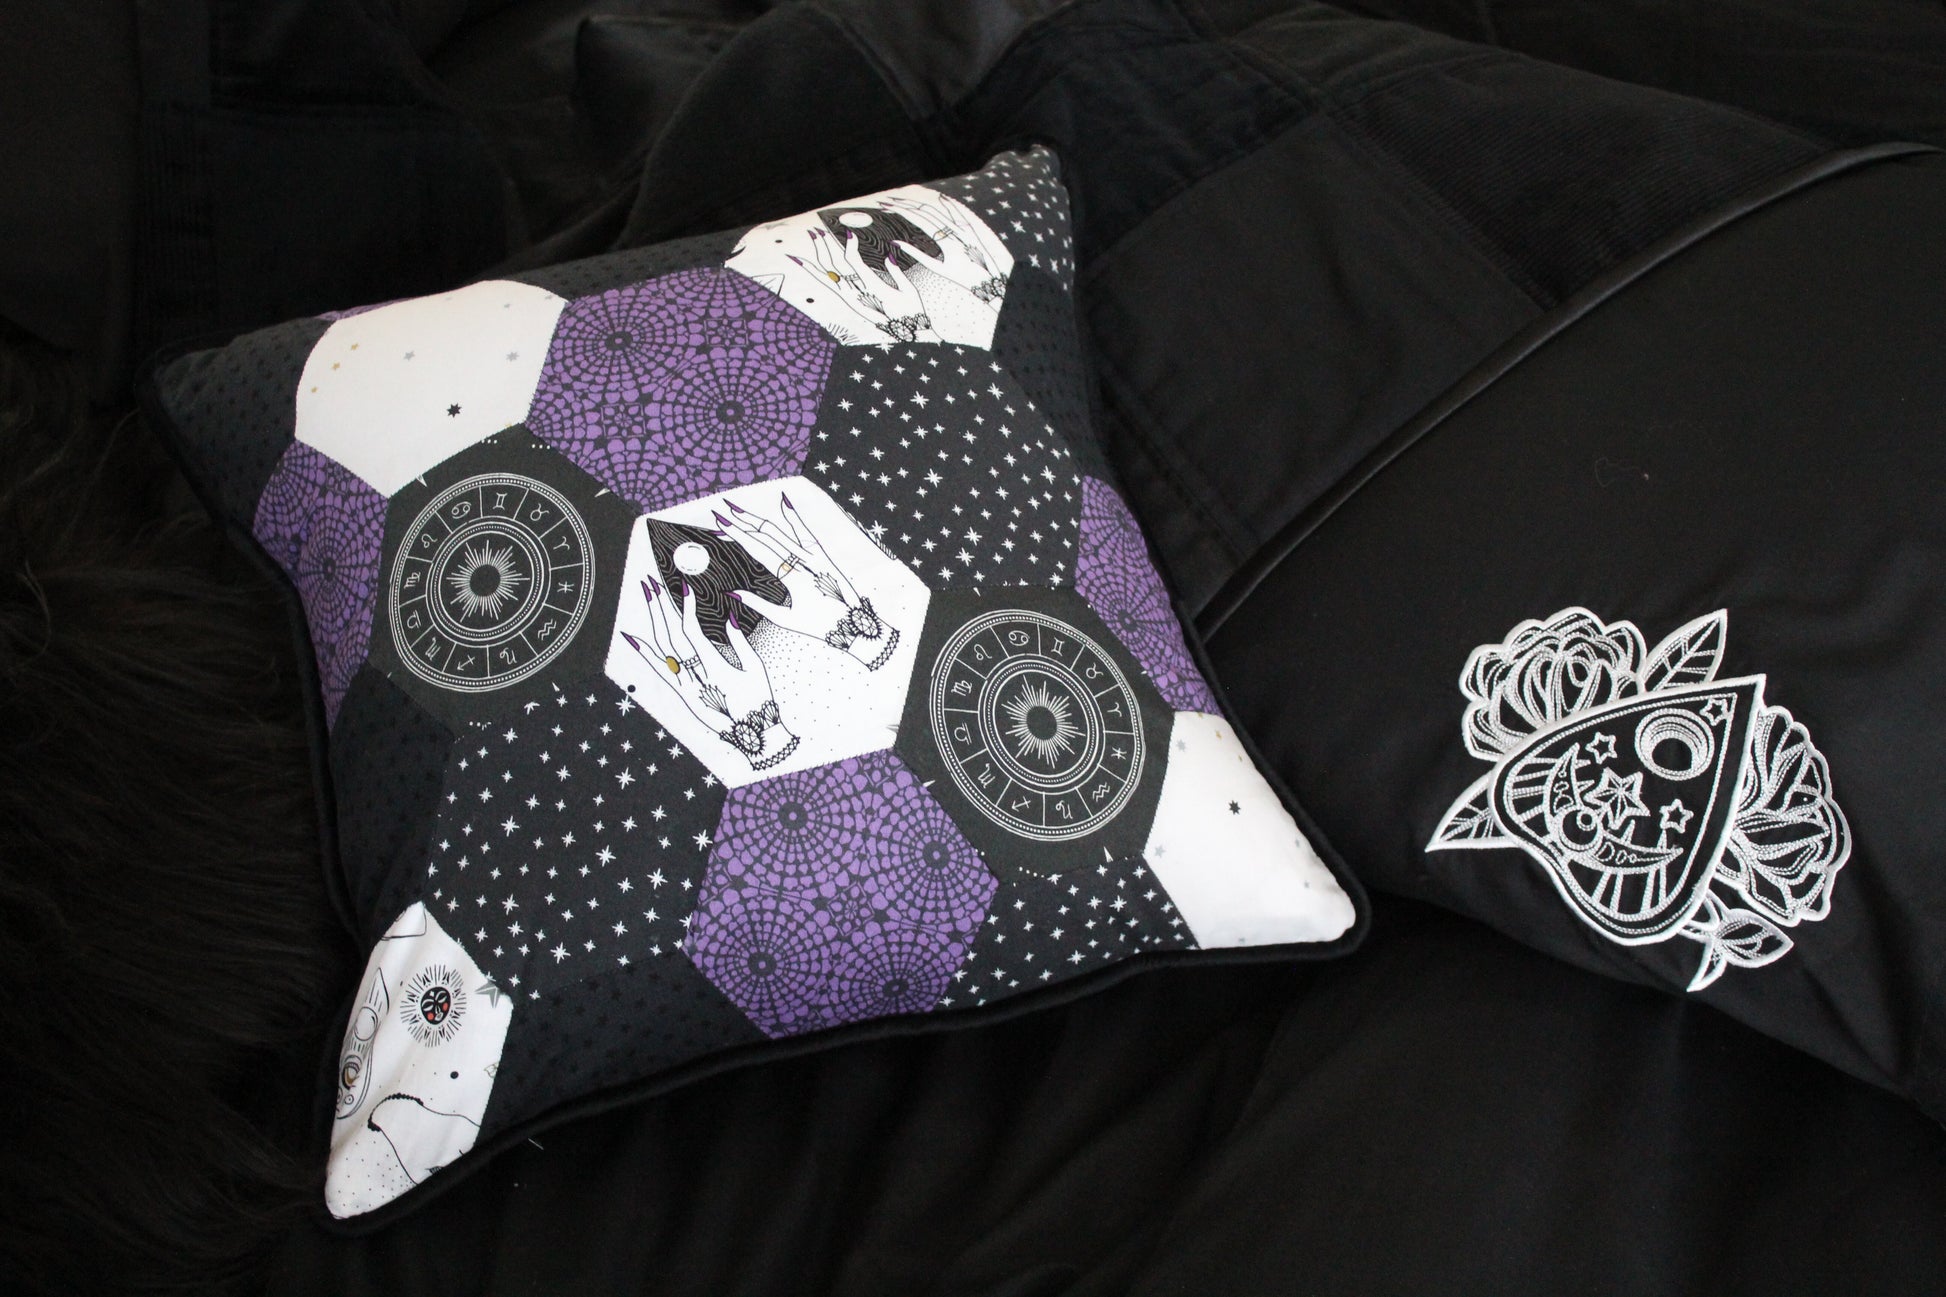 A patchwork cushion made of pink, grey and white hexagons full of mystical images including planchettes and a Zodiac wheel. Beside the cushion there is an embroidered white planchette on a black pillowcase